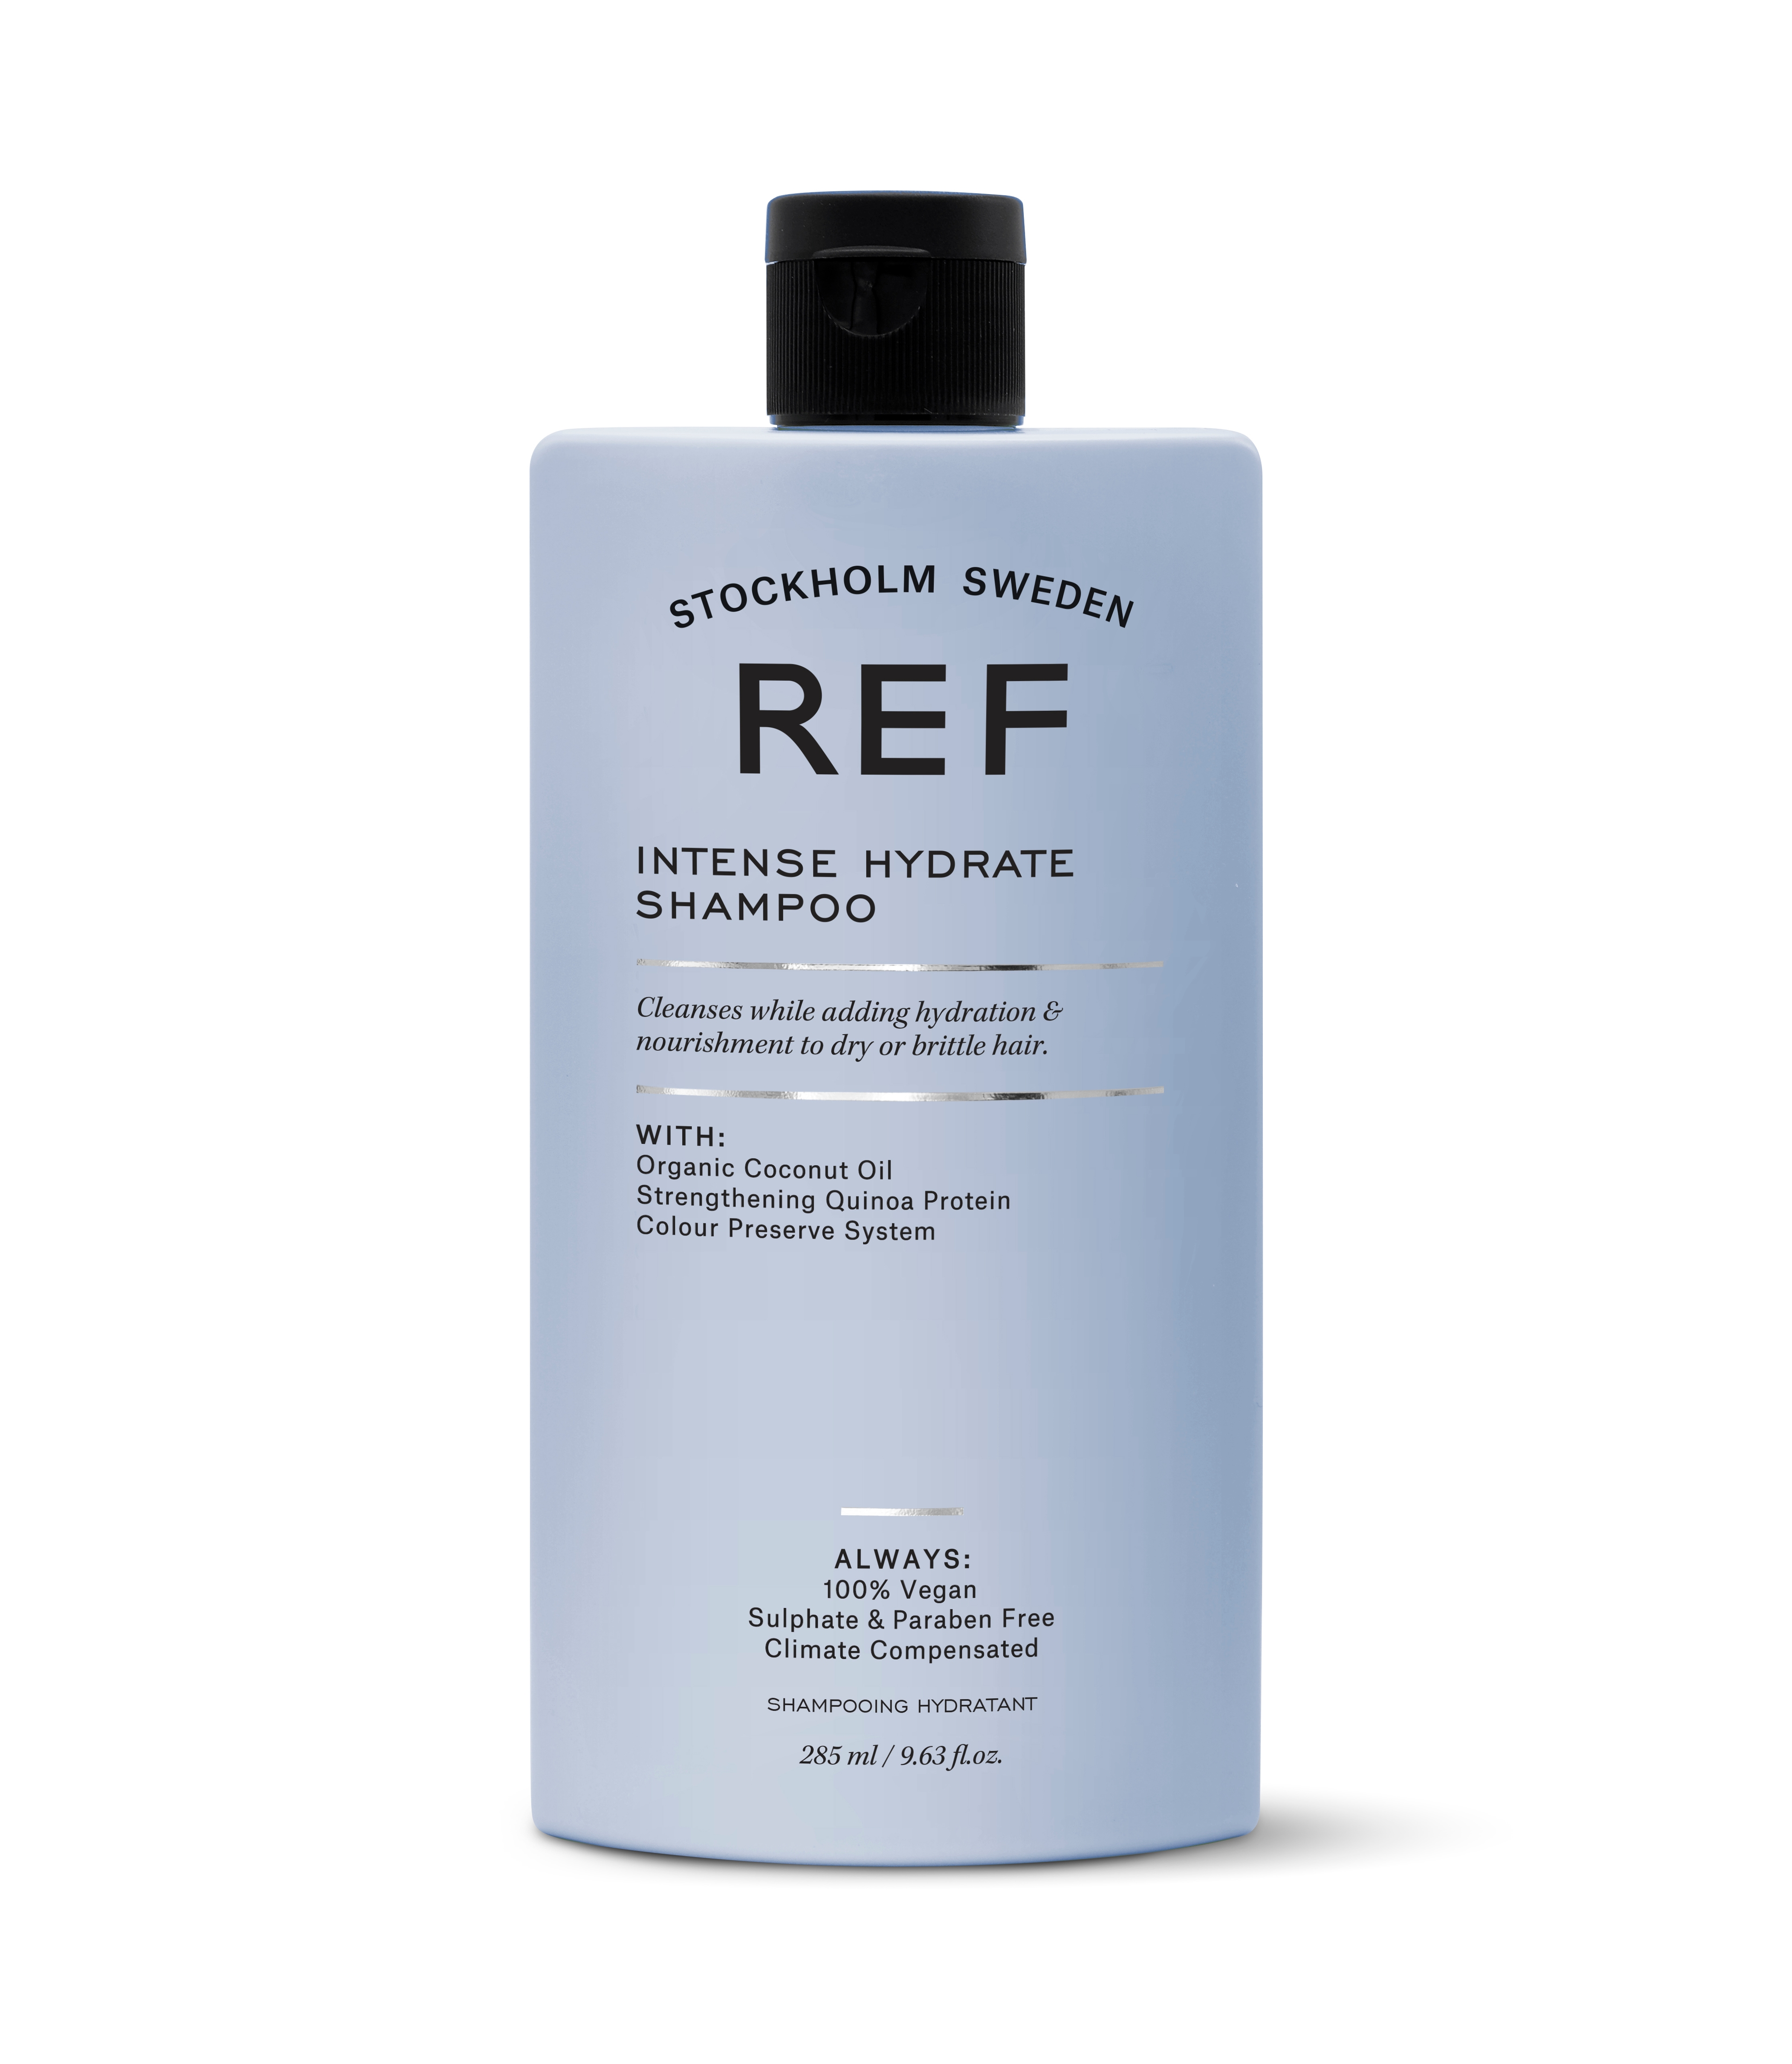 Product image from REF Shampoo - Intense Hydrate Shampoo